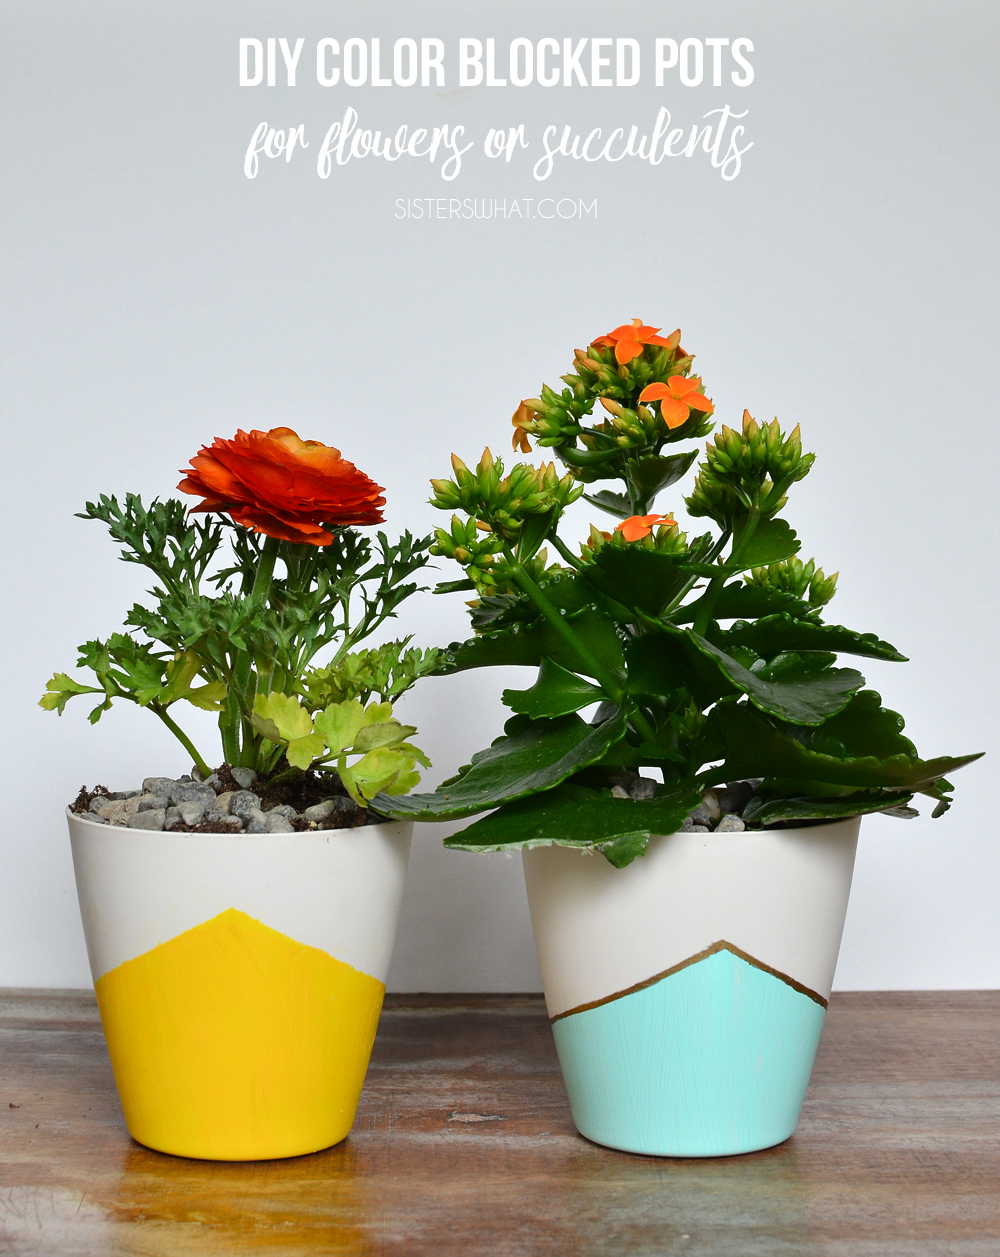 DIY Color blocked pots for flowers and succulents